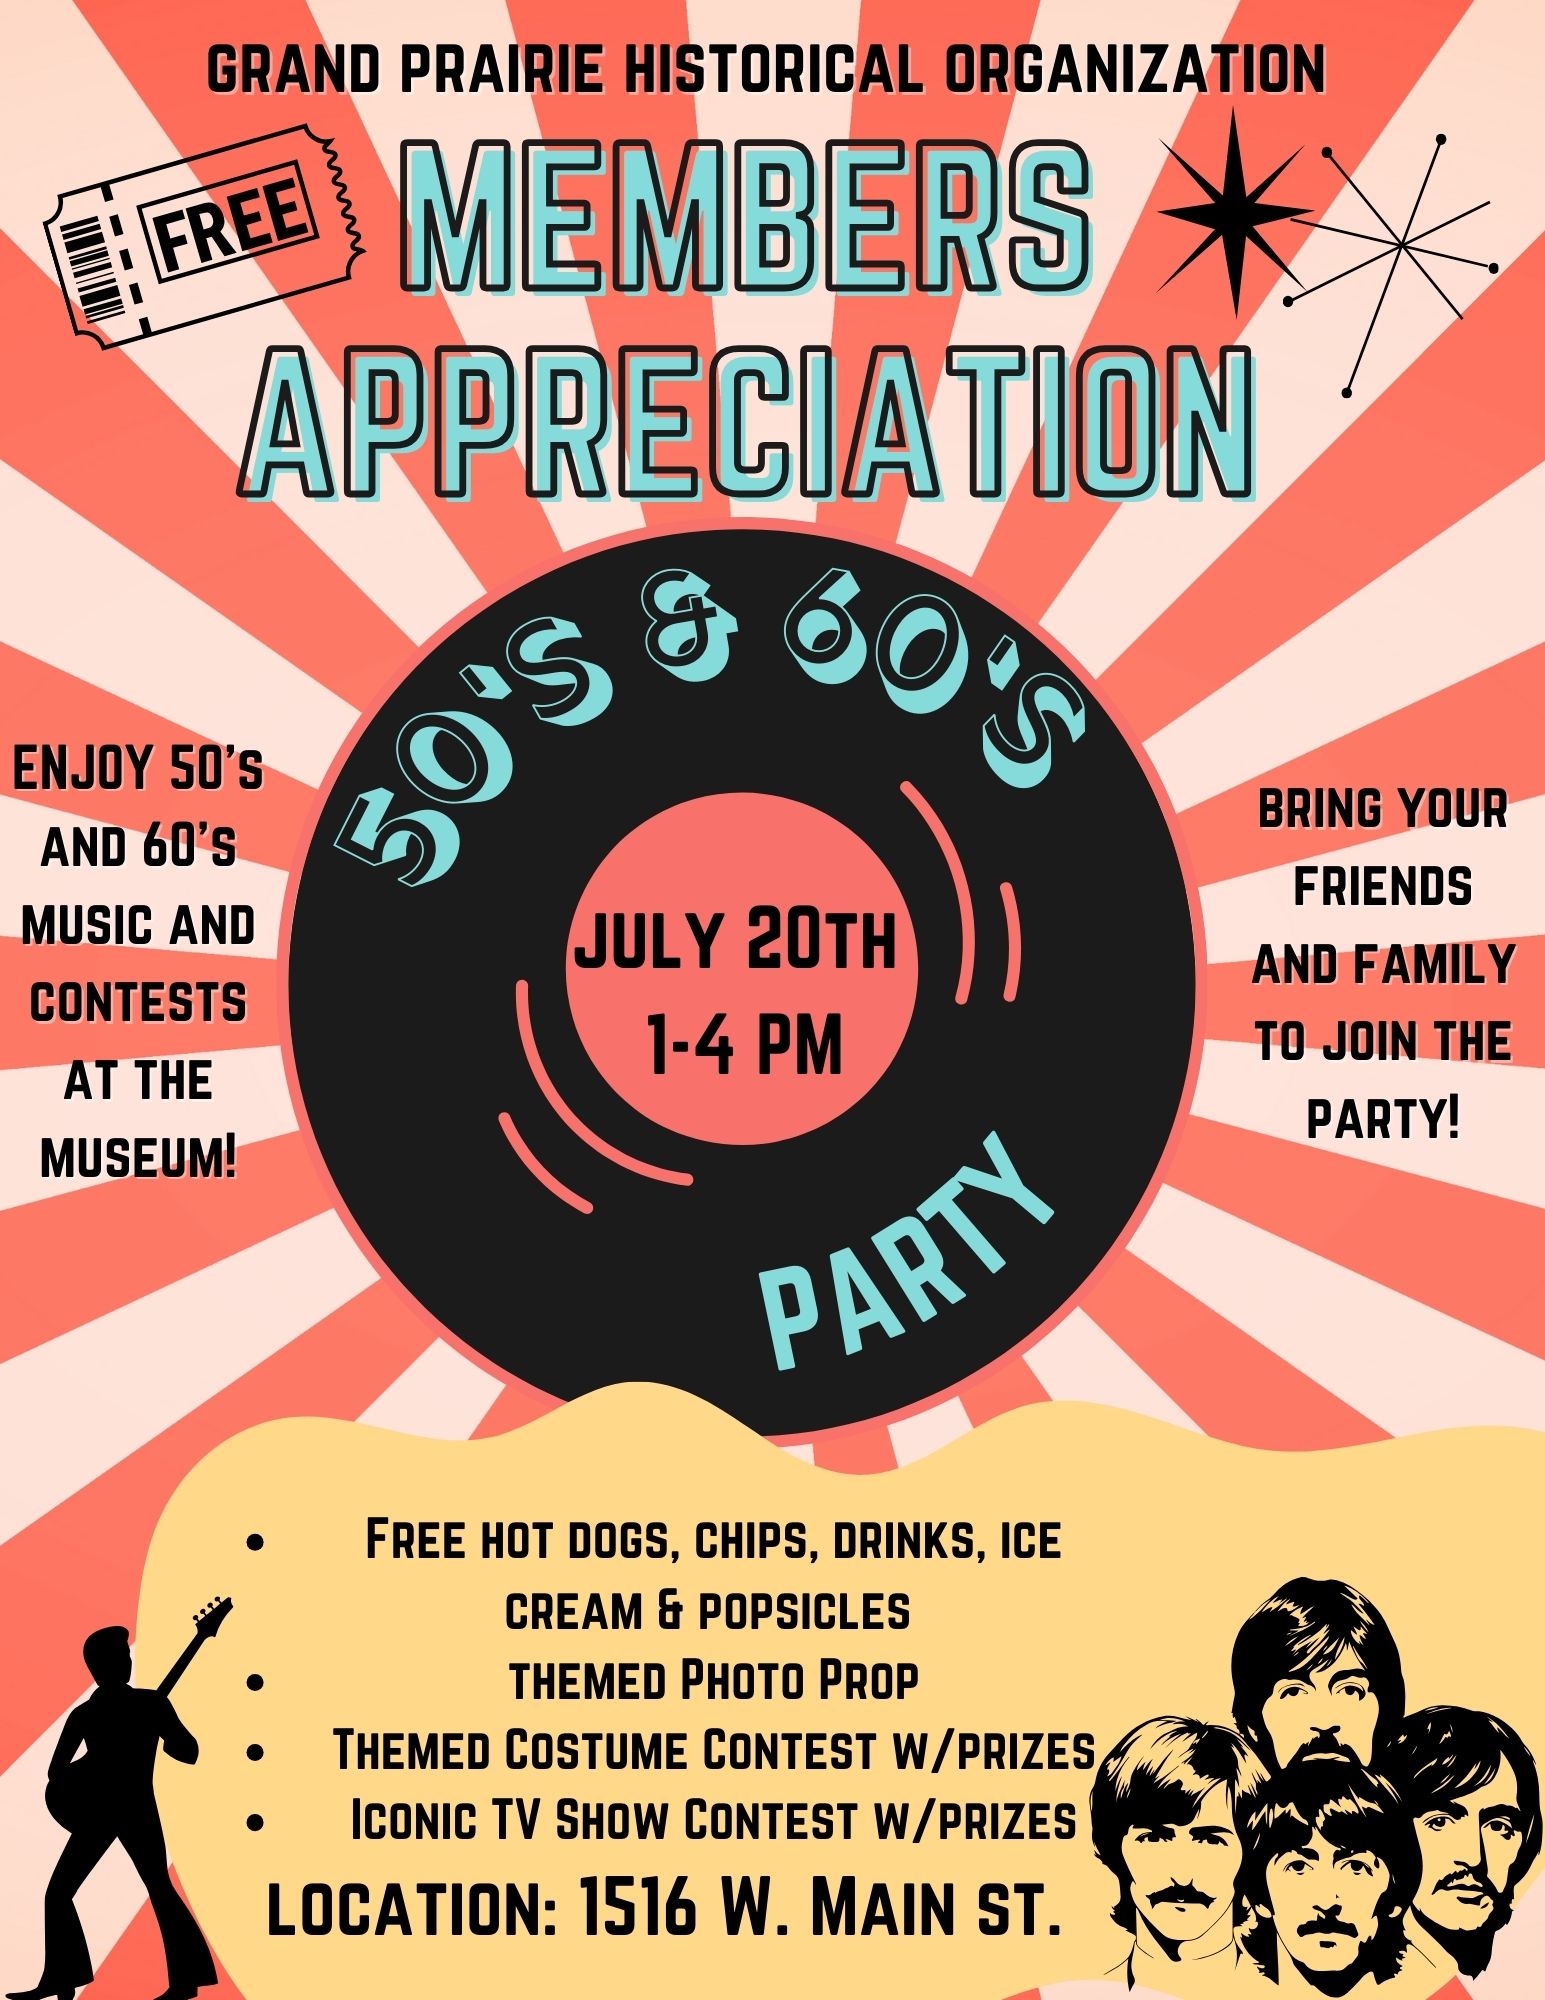 Members Appreciation flyer. Event will be on July 20, from 1 p.m. to 4 p.m. at 1516 W. Main St. 